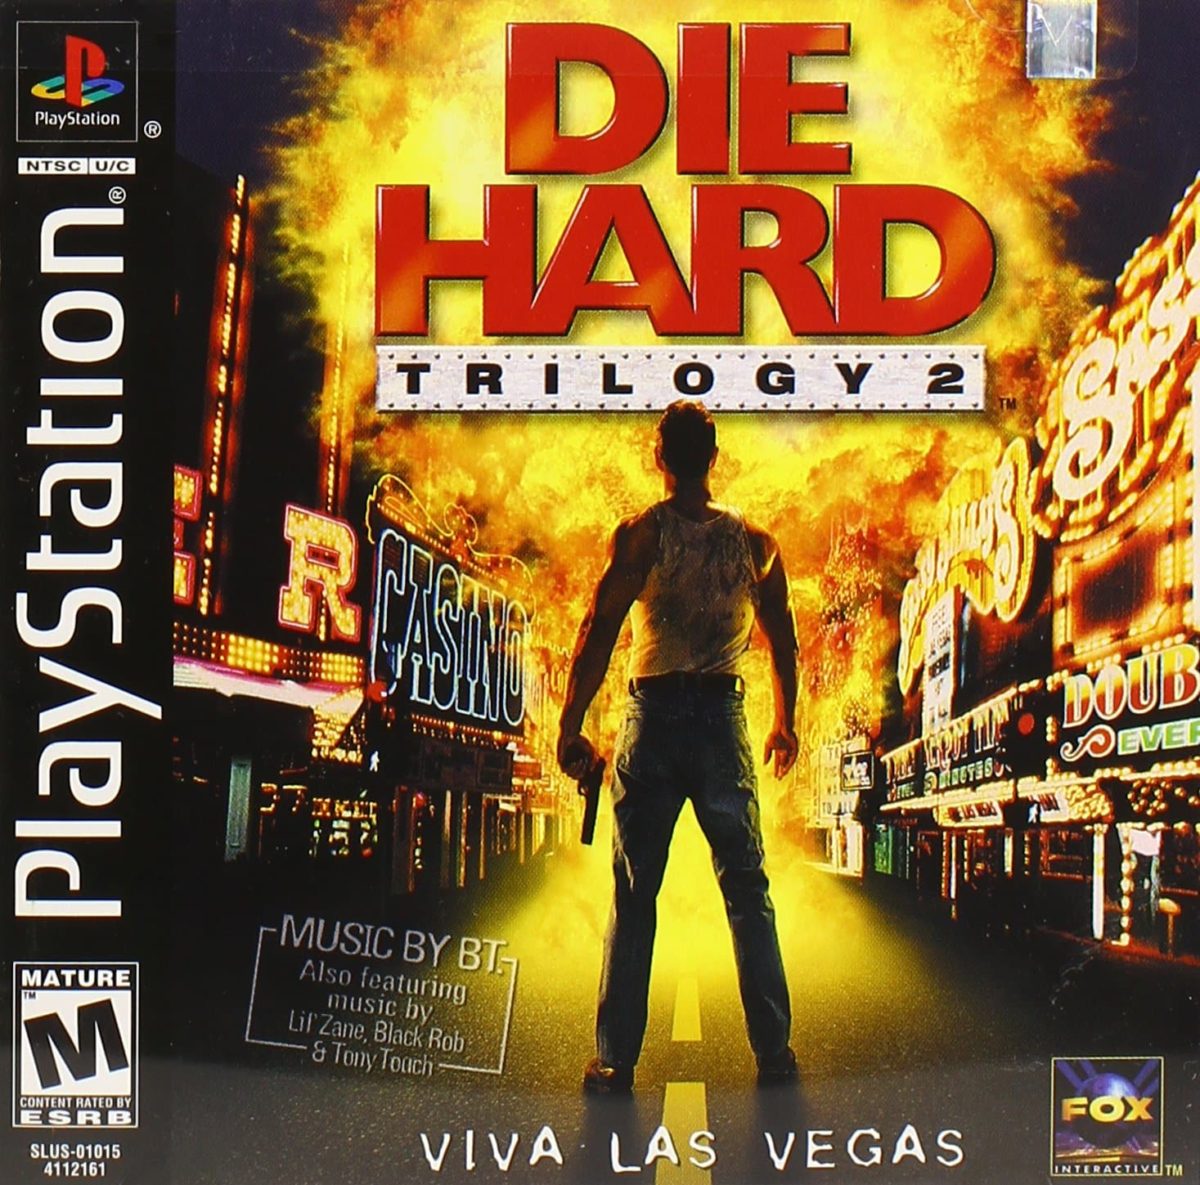 Die Hard Trilogy 2 Viva Las Vegas Player Count, Stats and Facts 2023